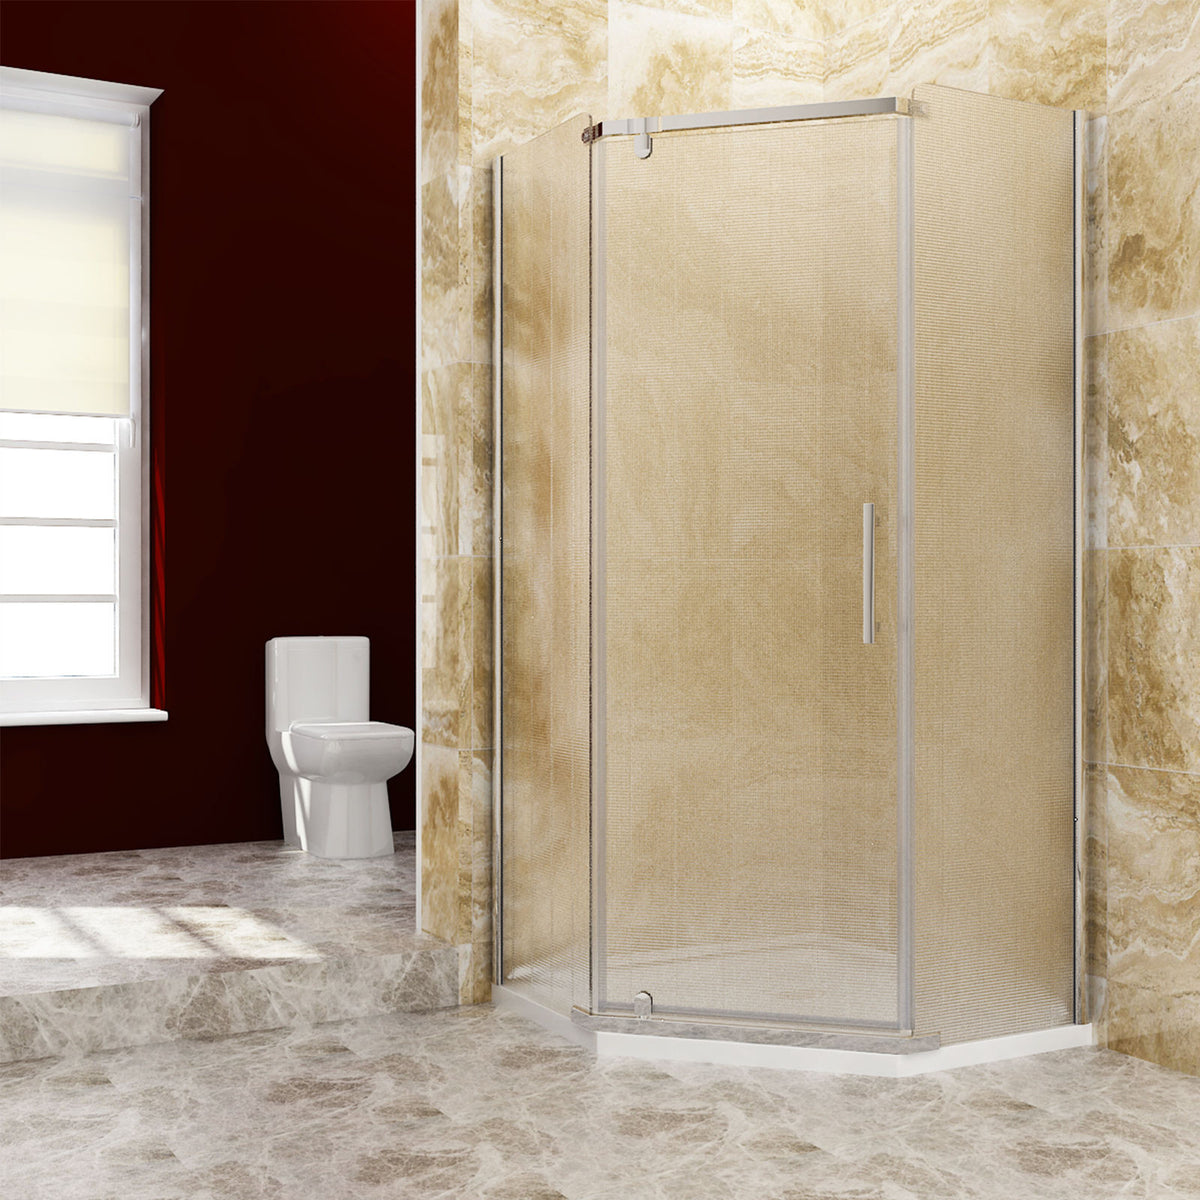 SUNNY SHOWER 38 in. W x 38 in. D x 72 in. H Frosted Chrome Finish Pivot Enclosures With Pivot Door